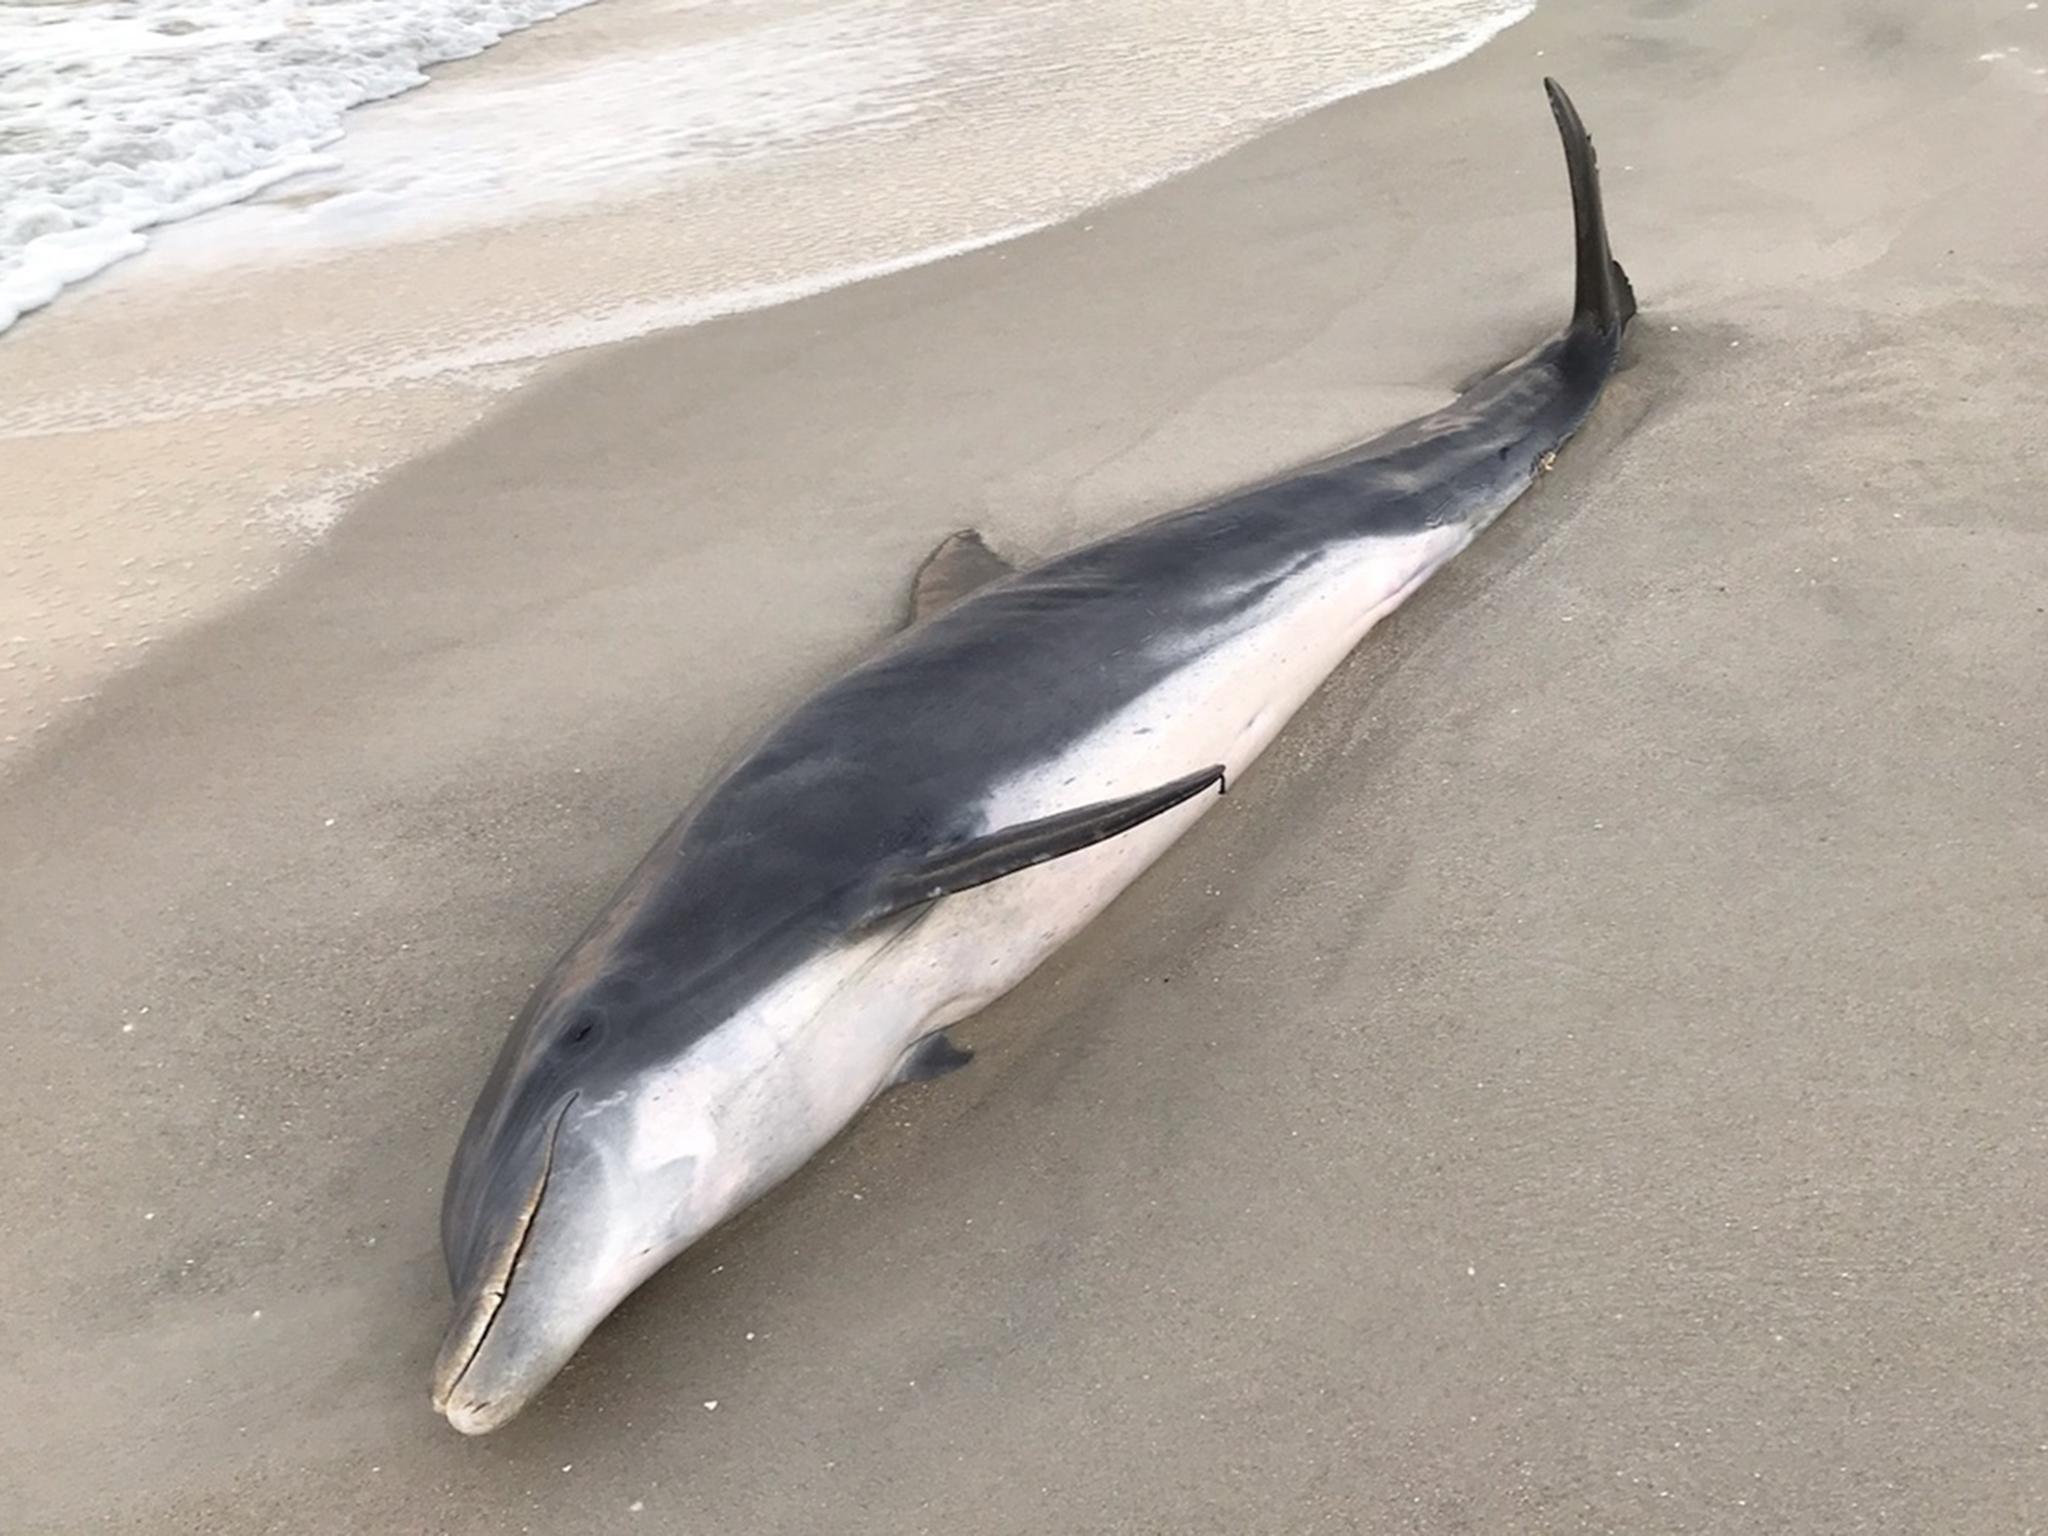 Two dolphins were found dead within a week of one another